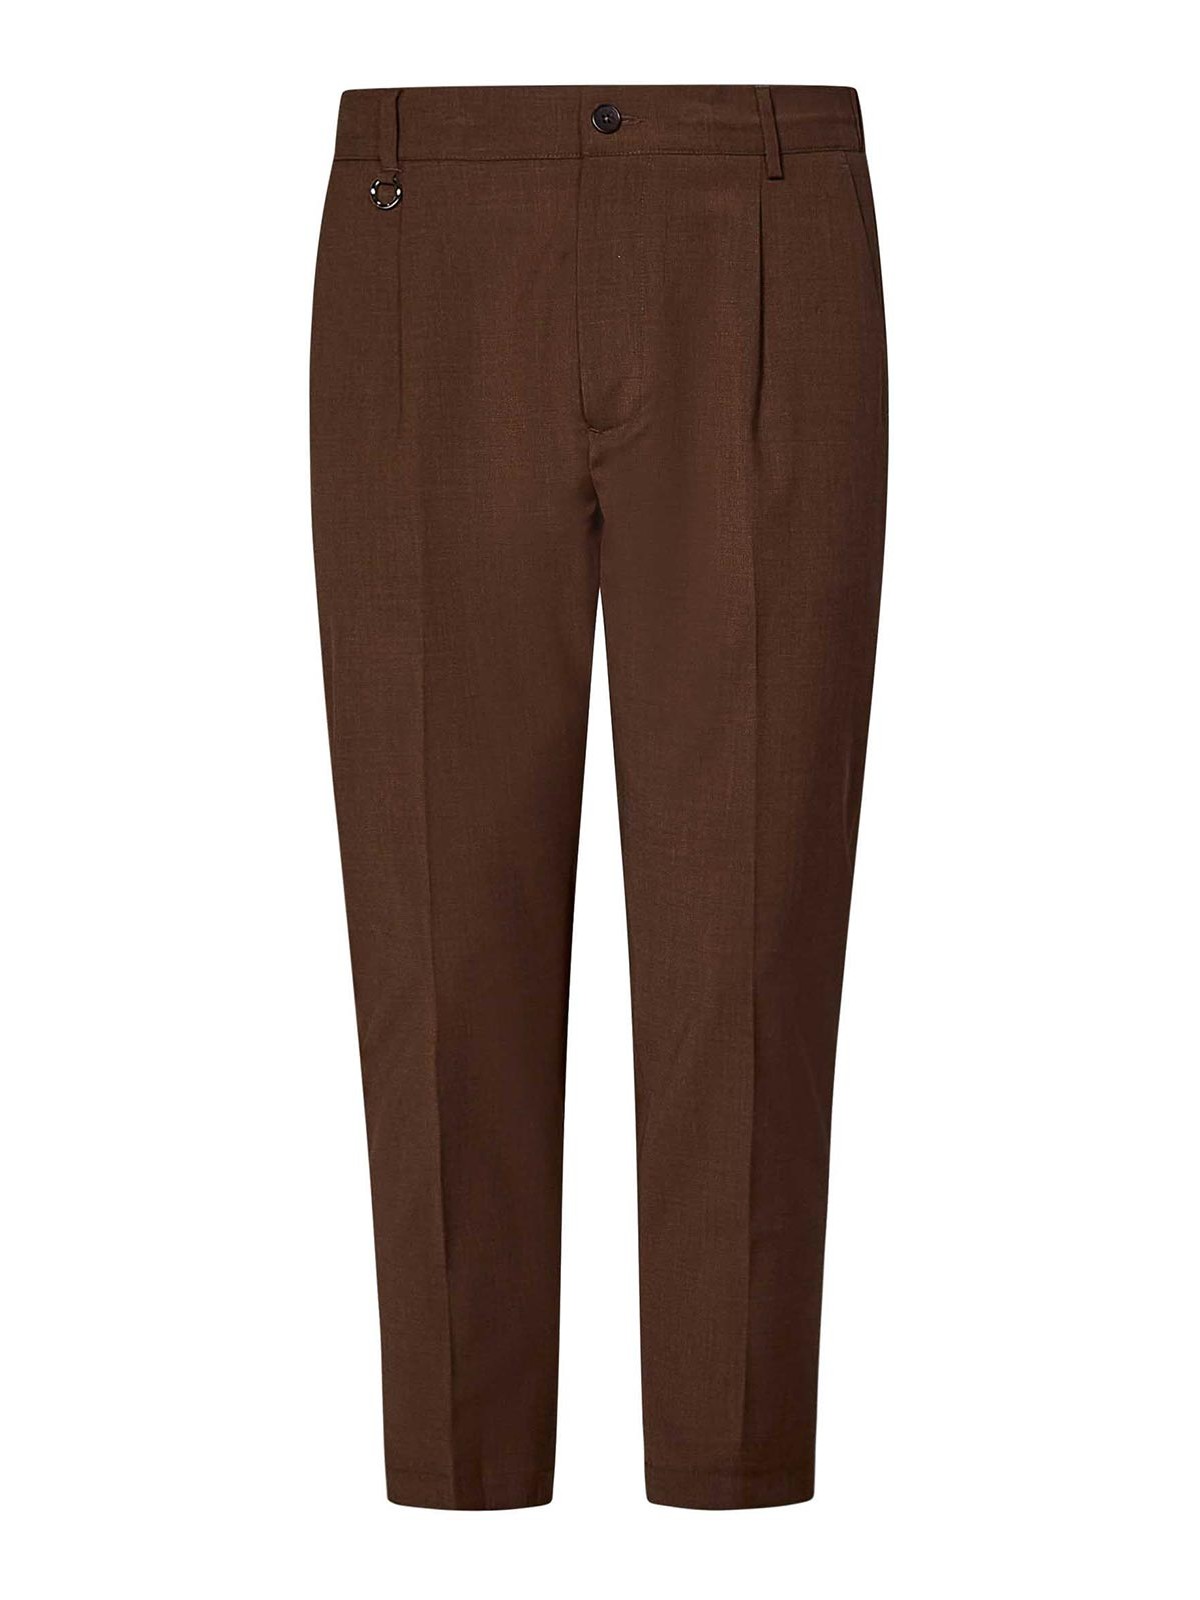 Golden Craft Coffee-colored Trousers In Brown